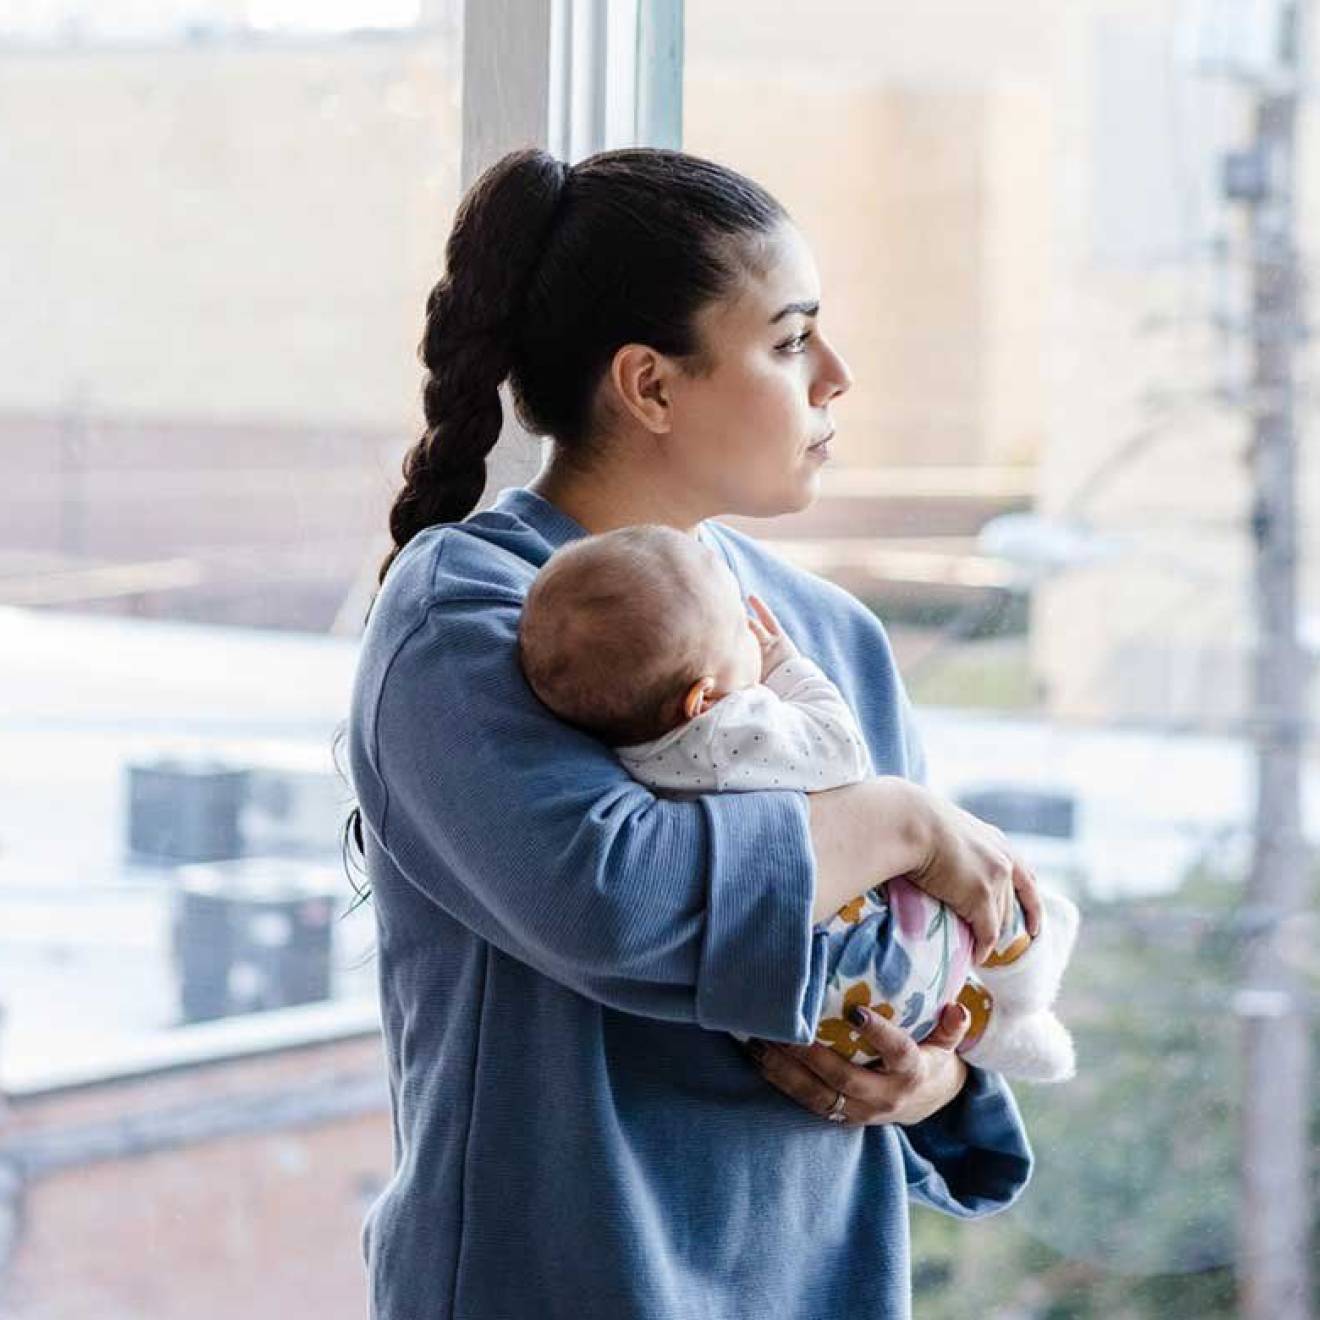 A woman with a long ponytail holds a baby and looks out the window with a trouble expression on her face